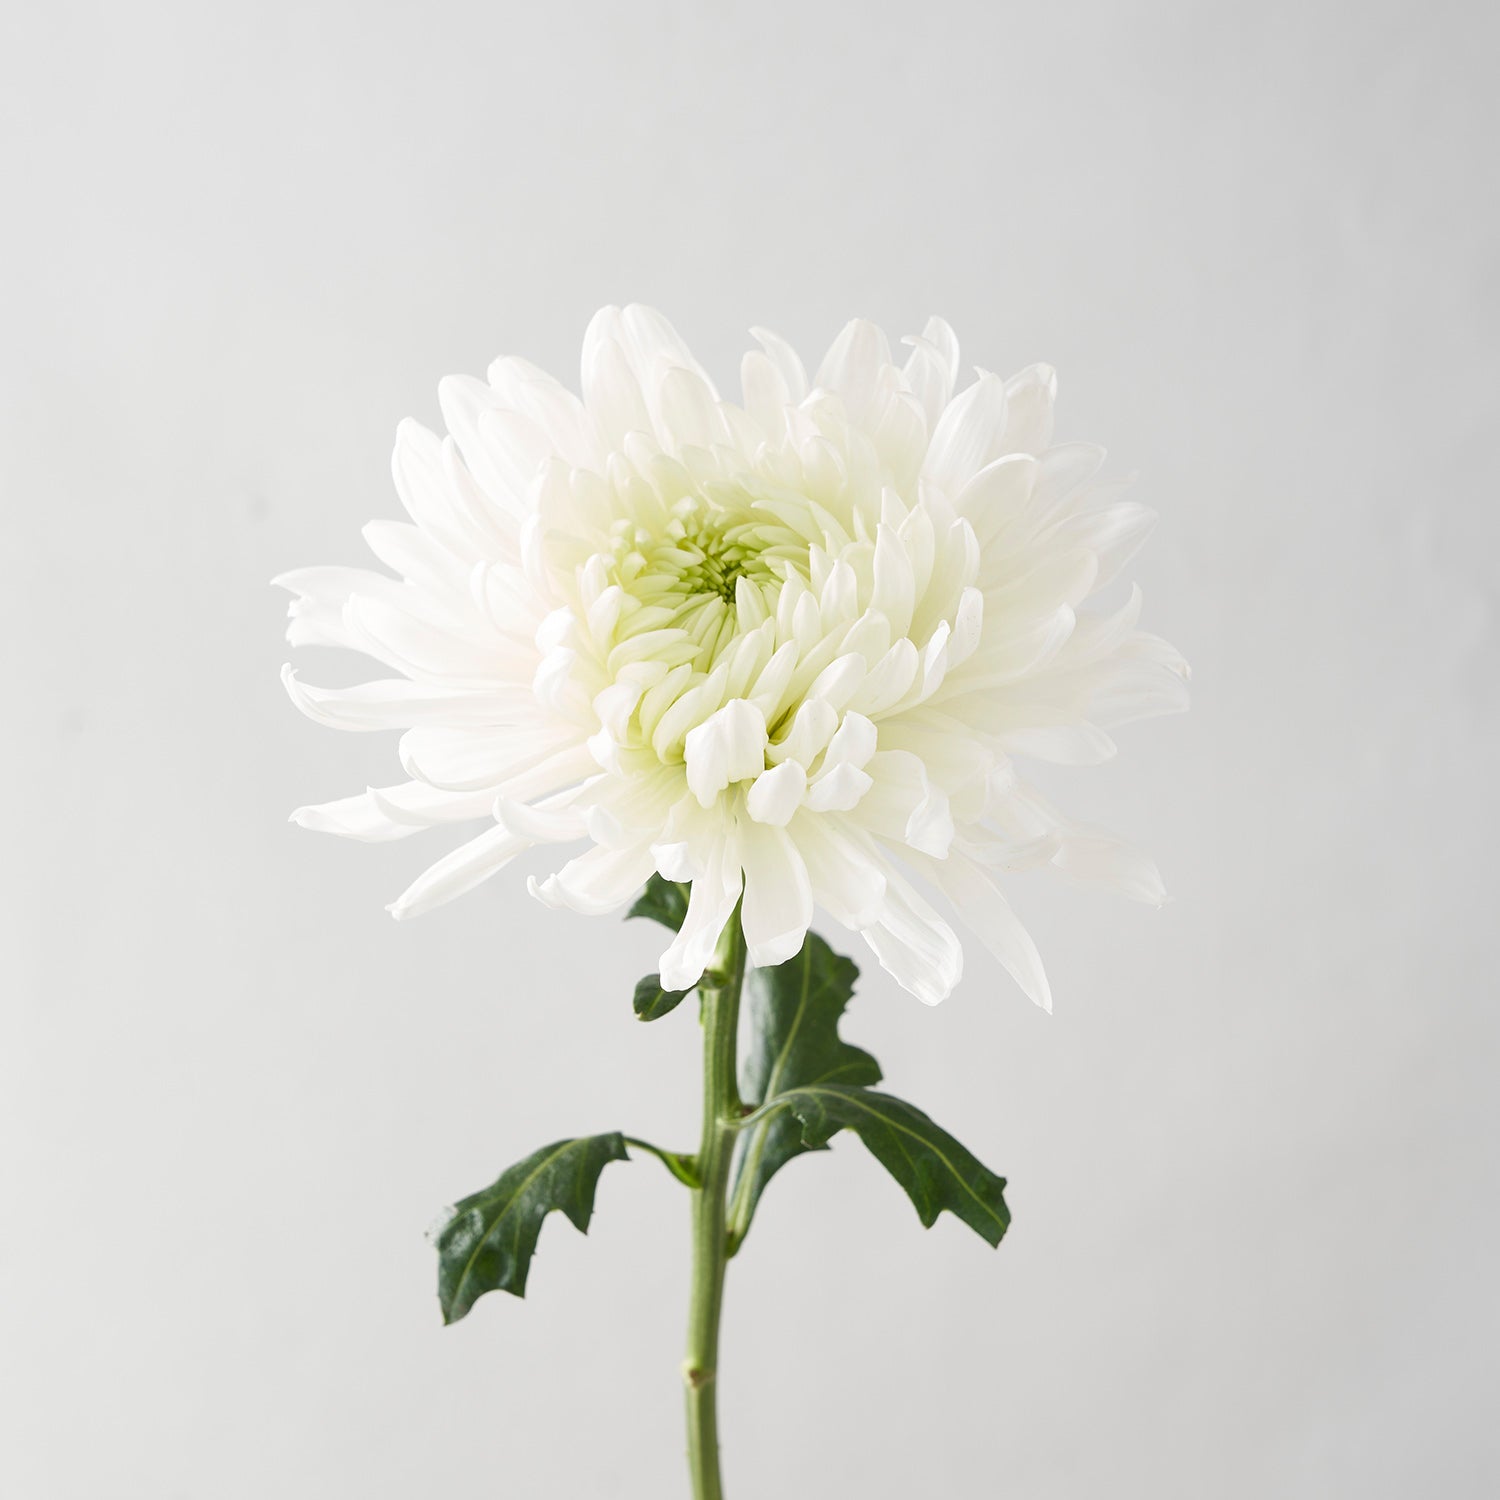 Close up of one chrysanthemum on white background.